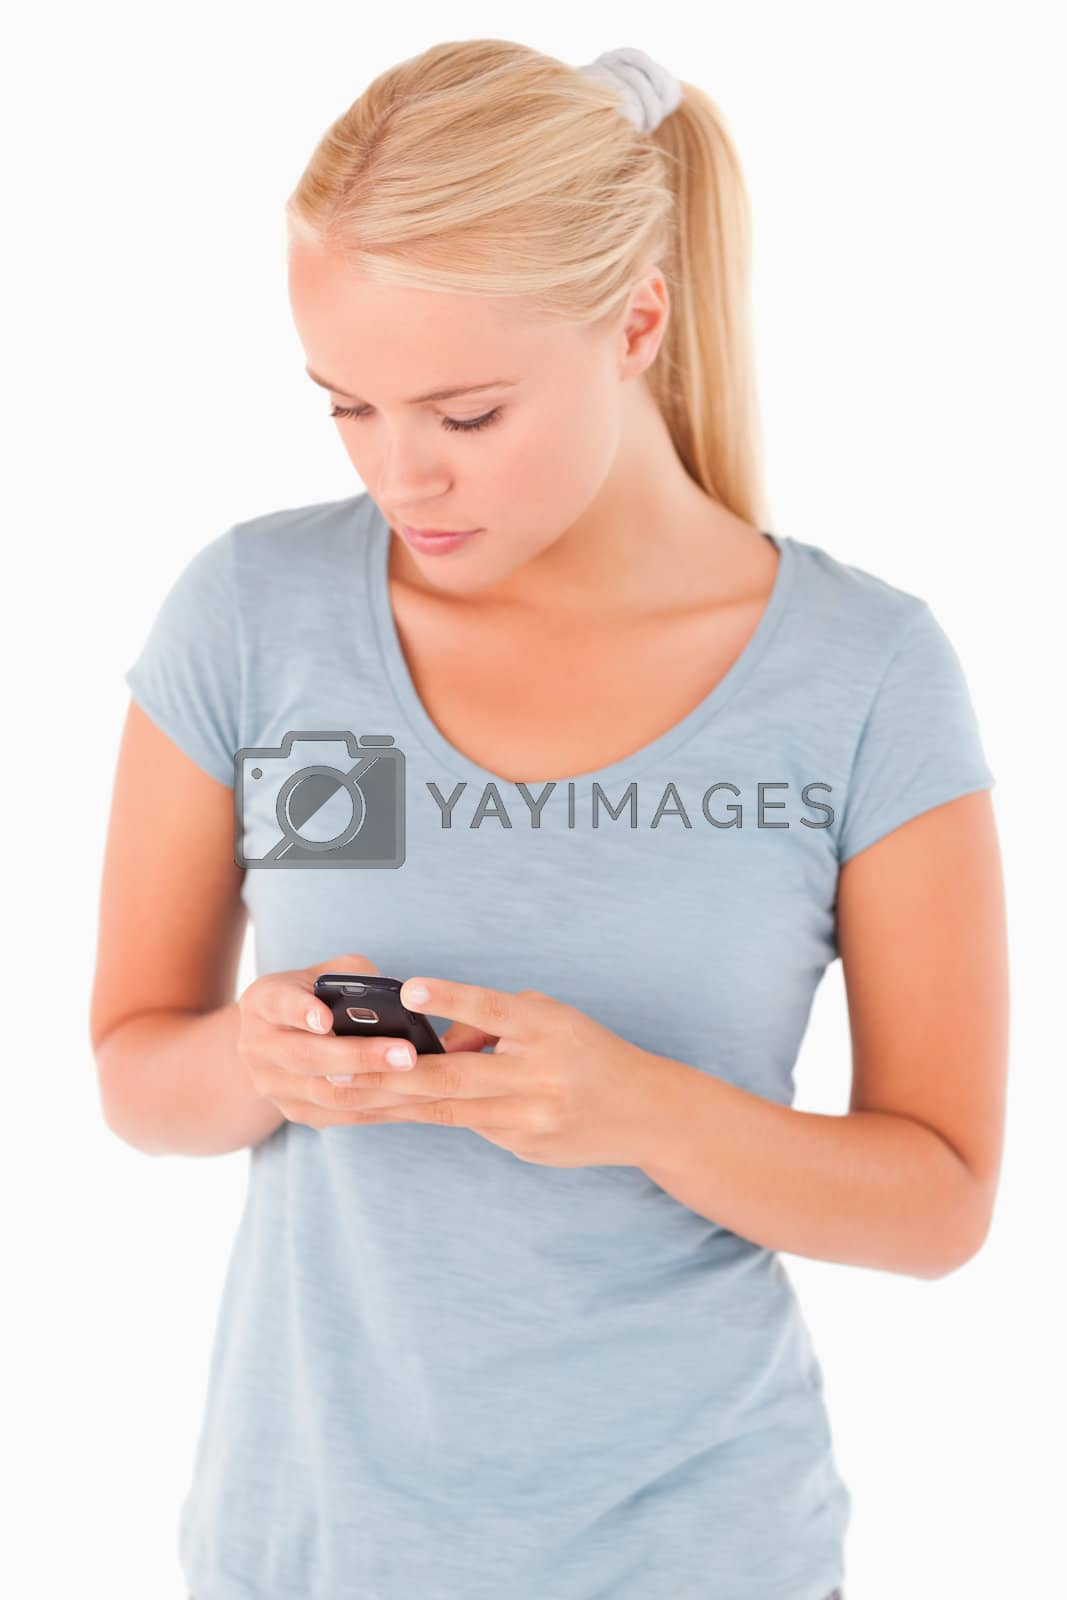 Royalty free image of Cute Woman dialing on a phone by Wavebreakmedia